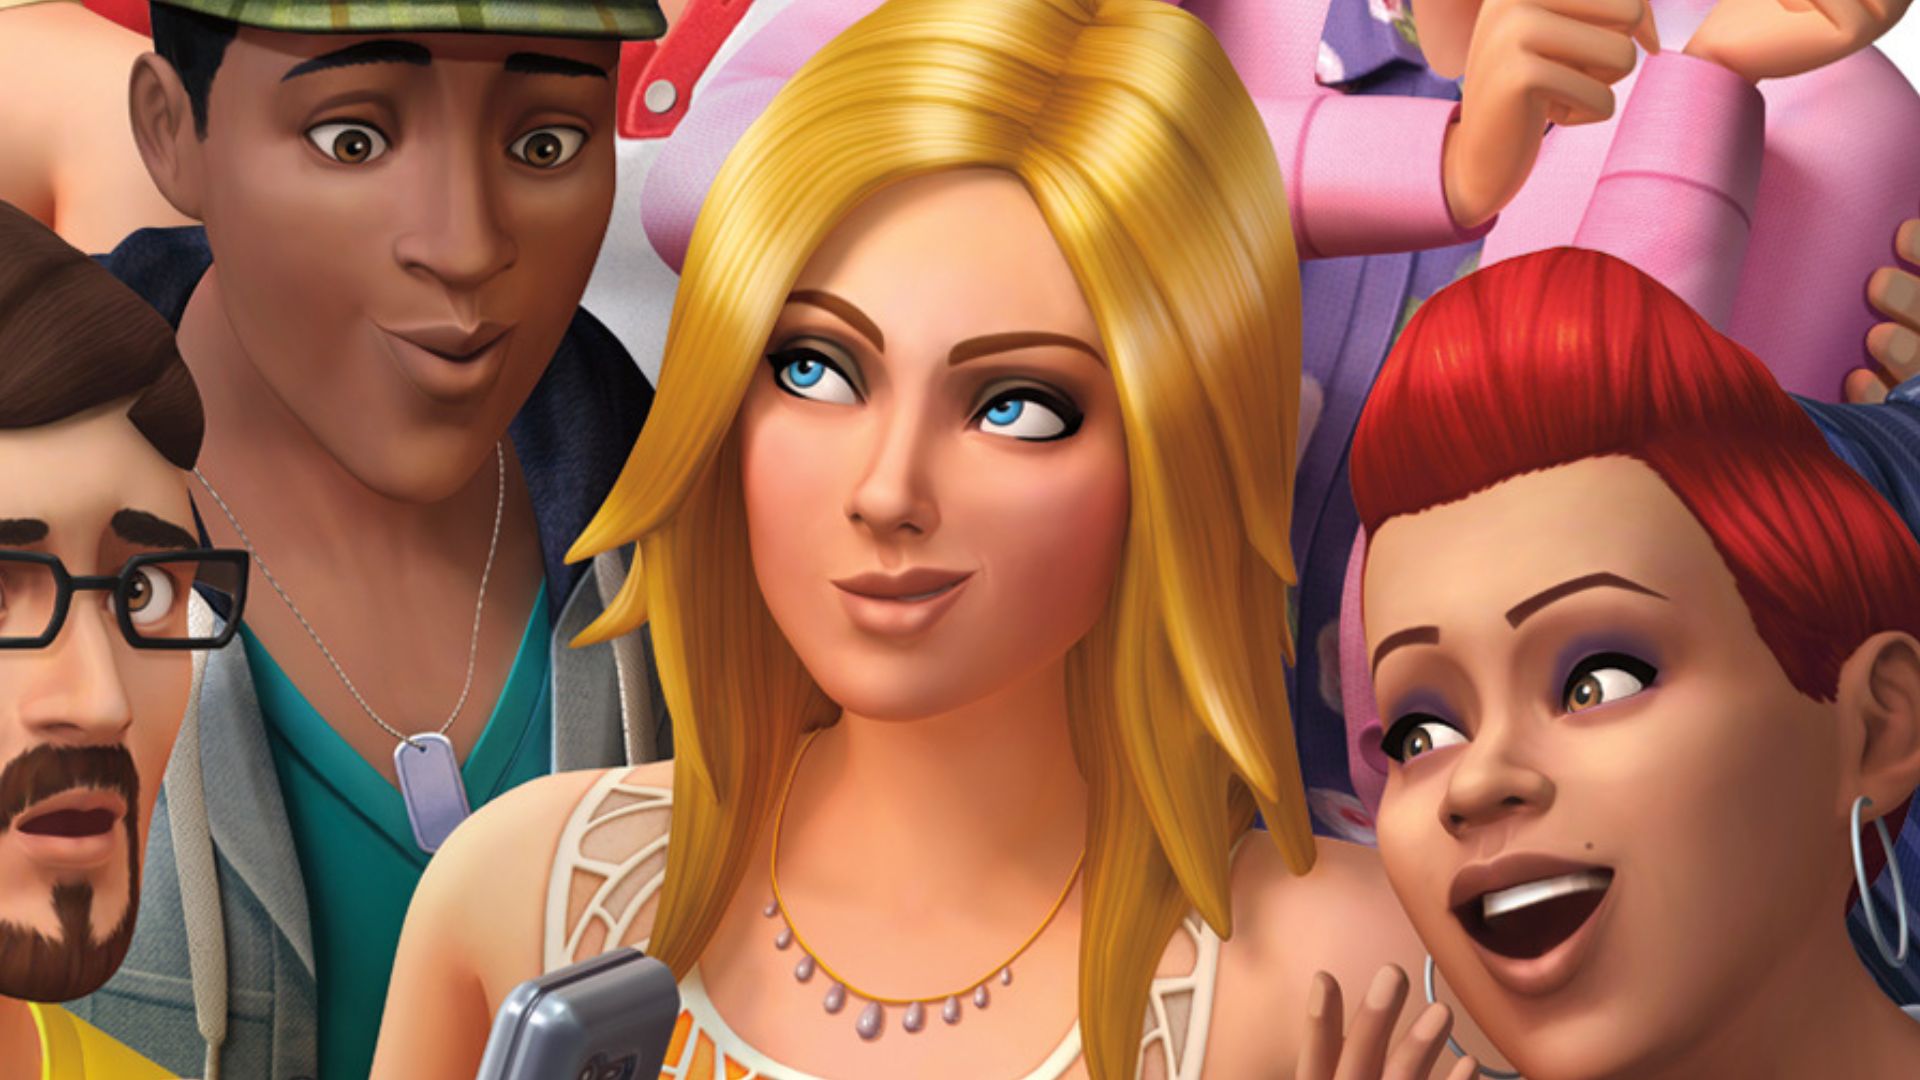 Sims 5 cloud integration could come to the life sim, says YouTuber